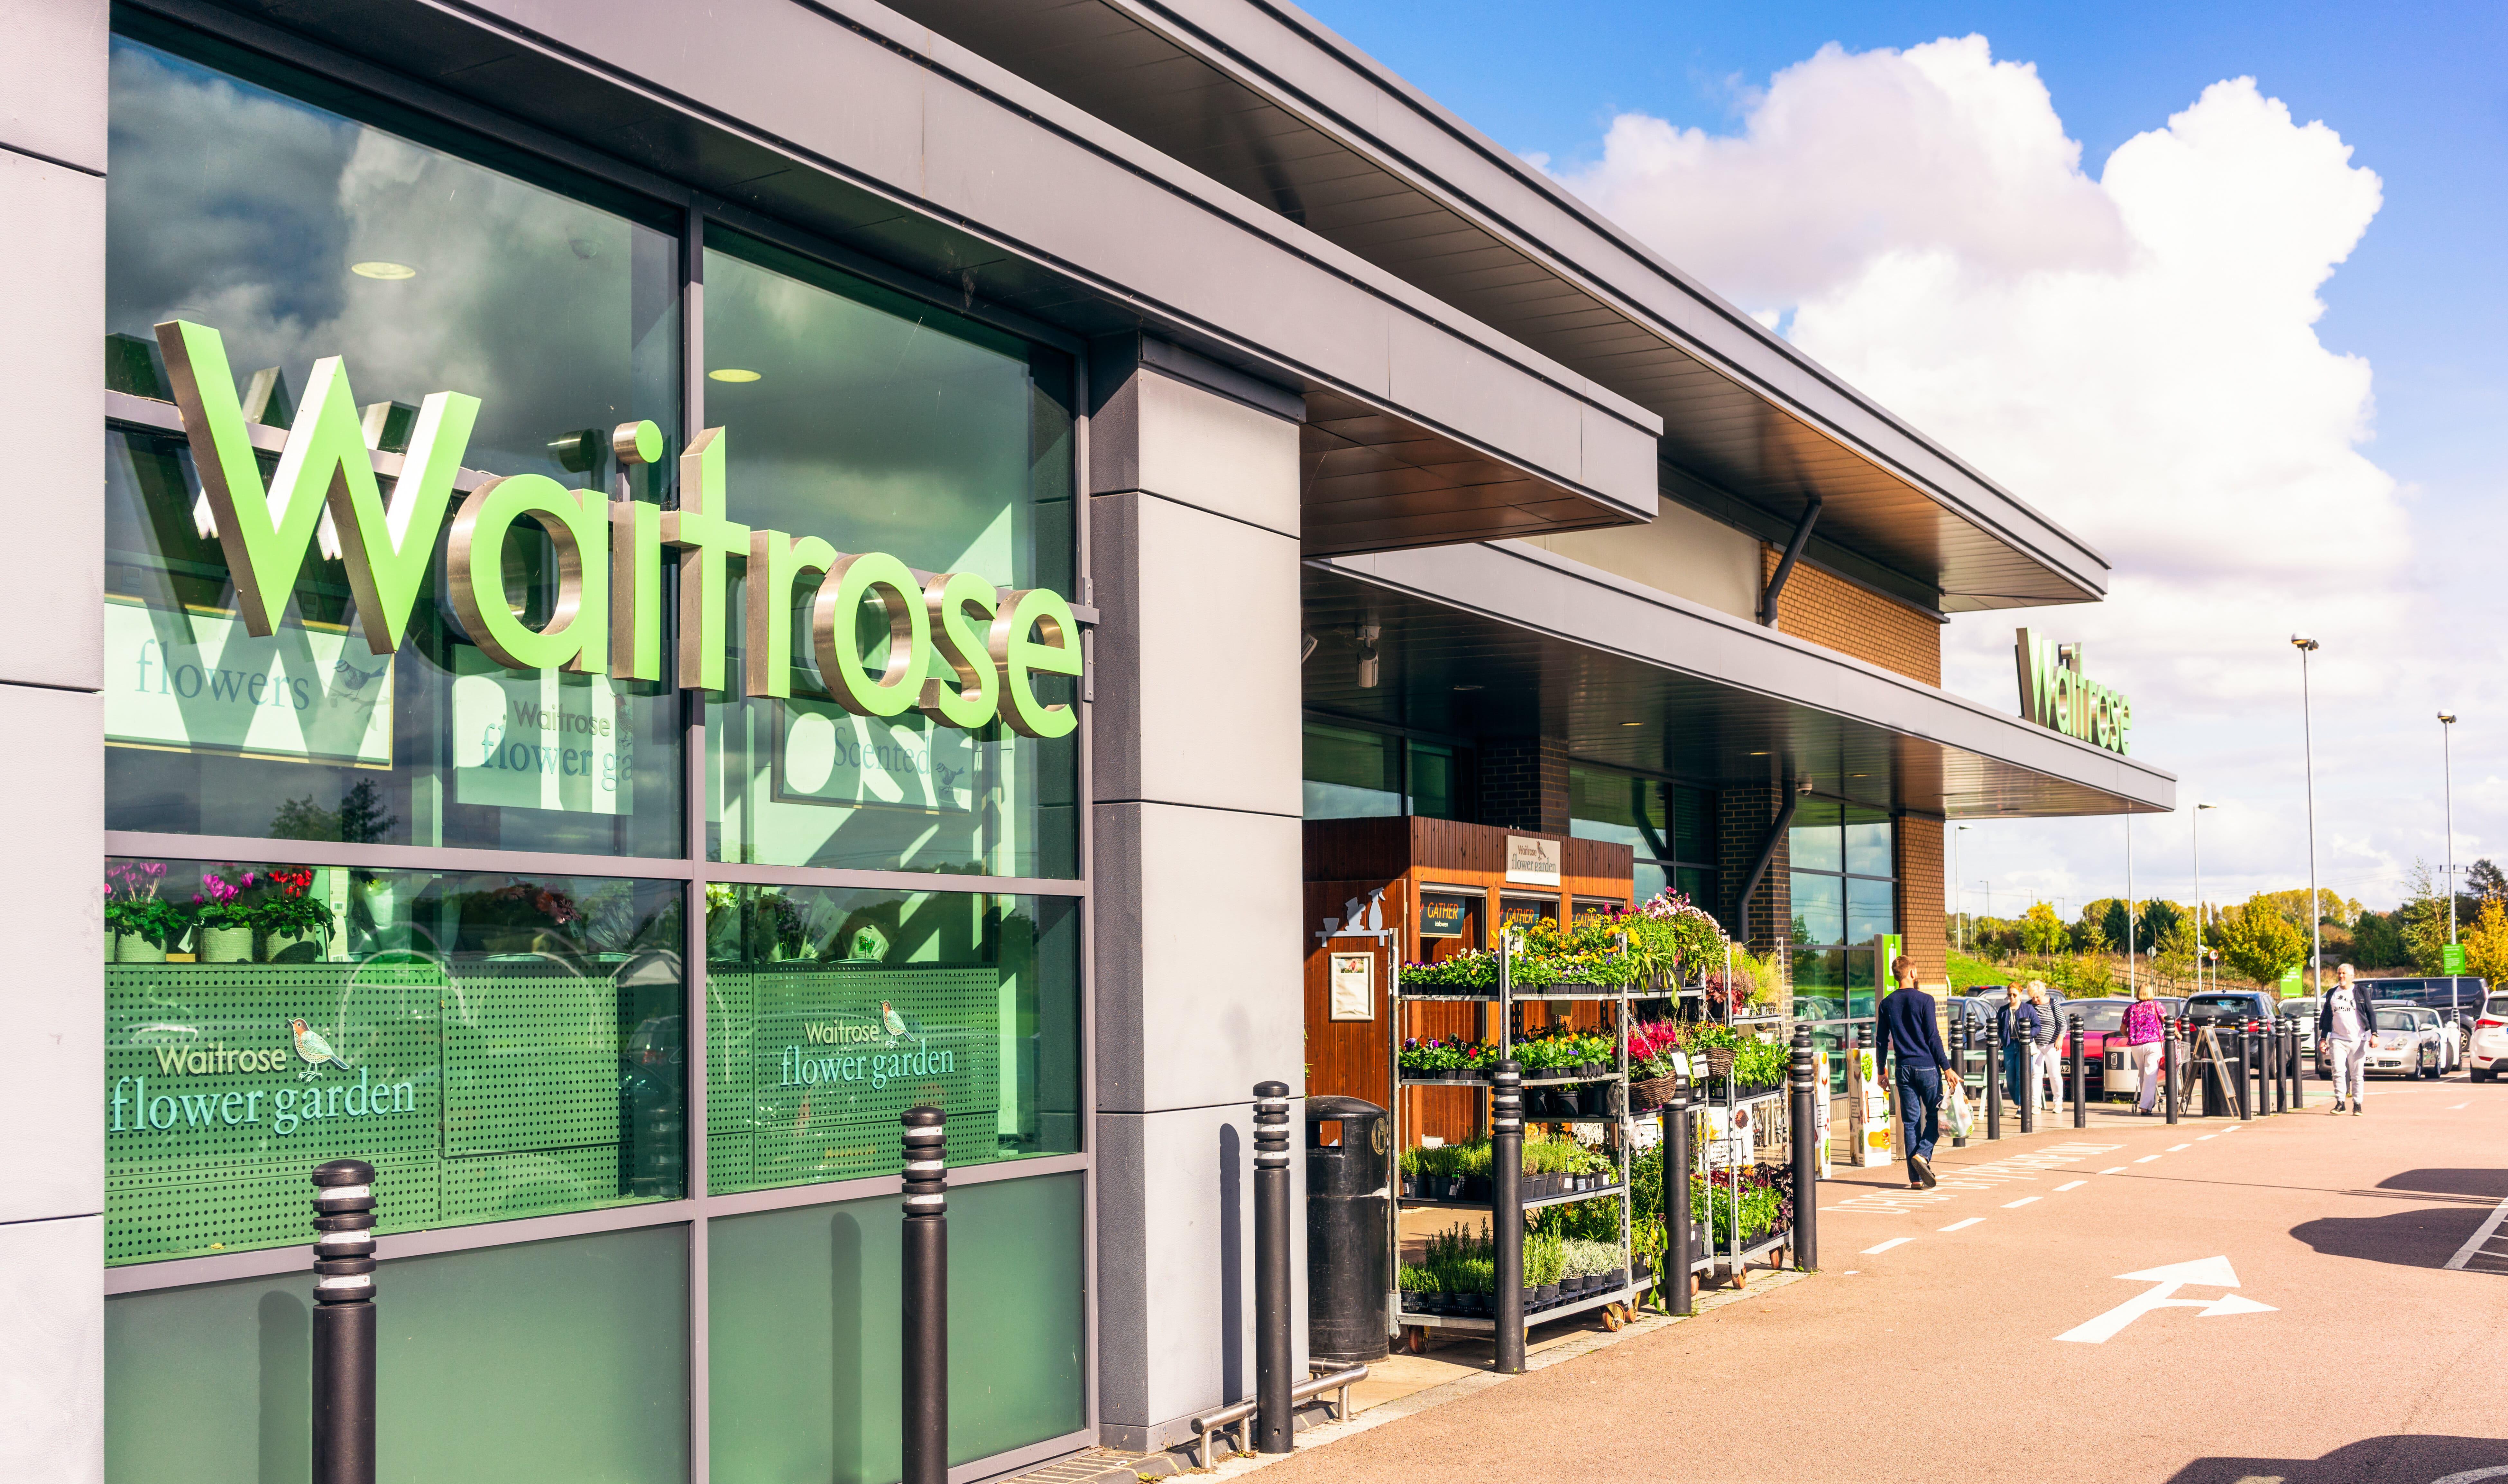 External shot of Waitrose with shoppers in the background